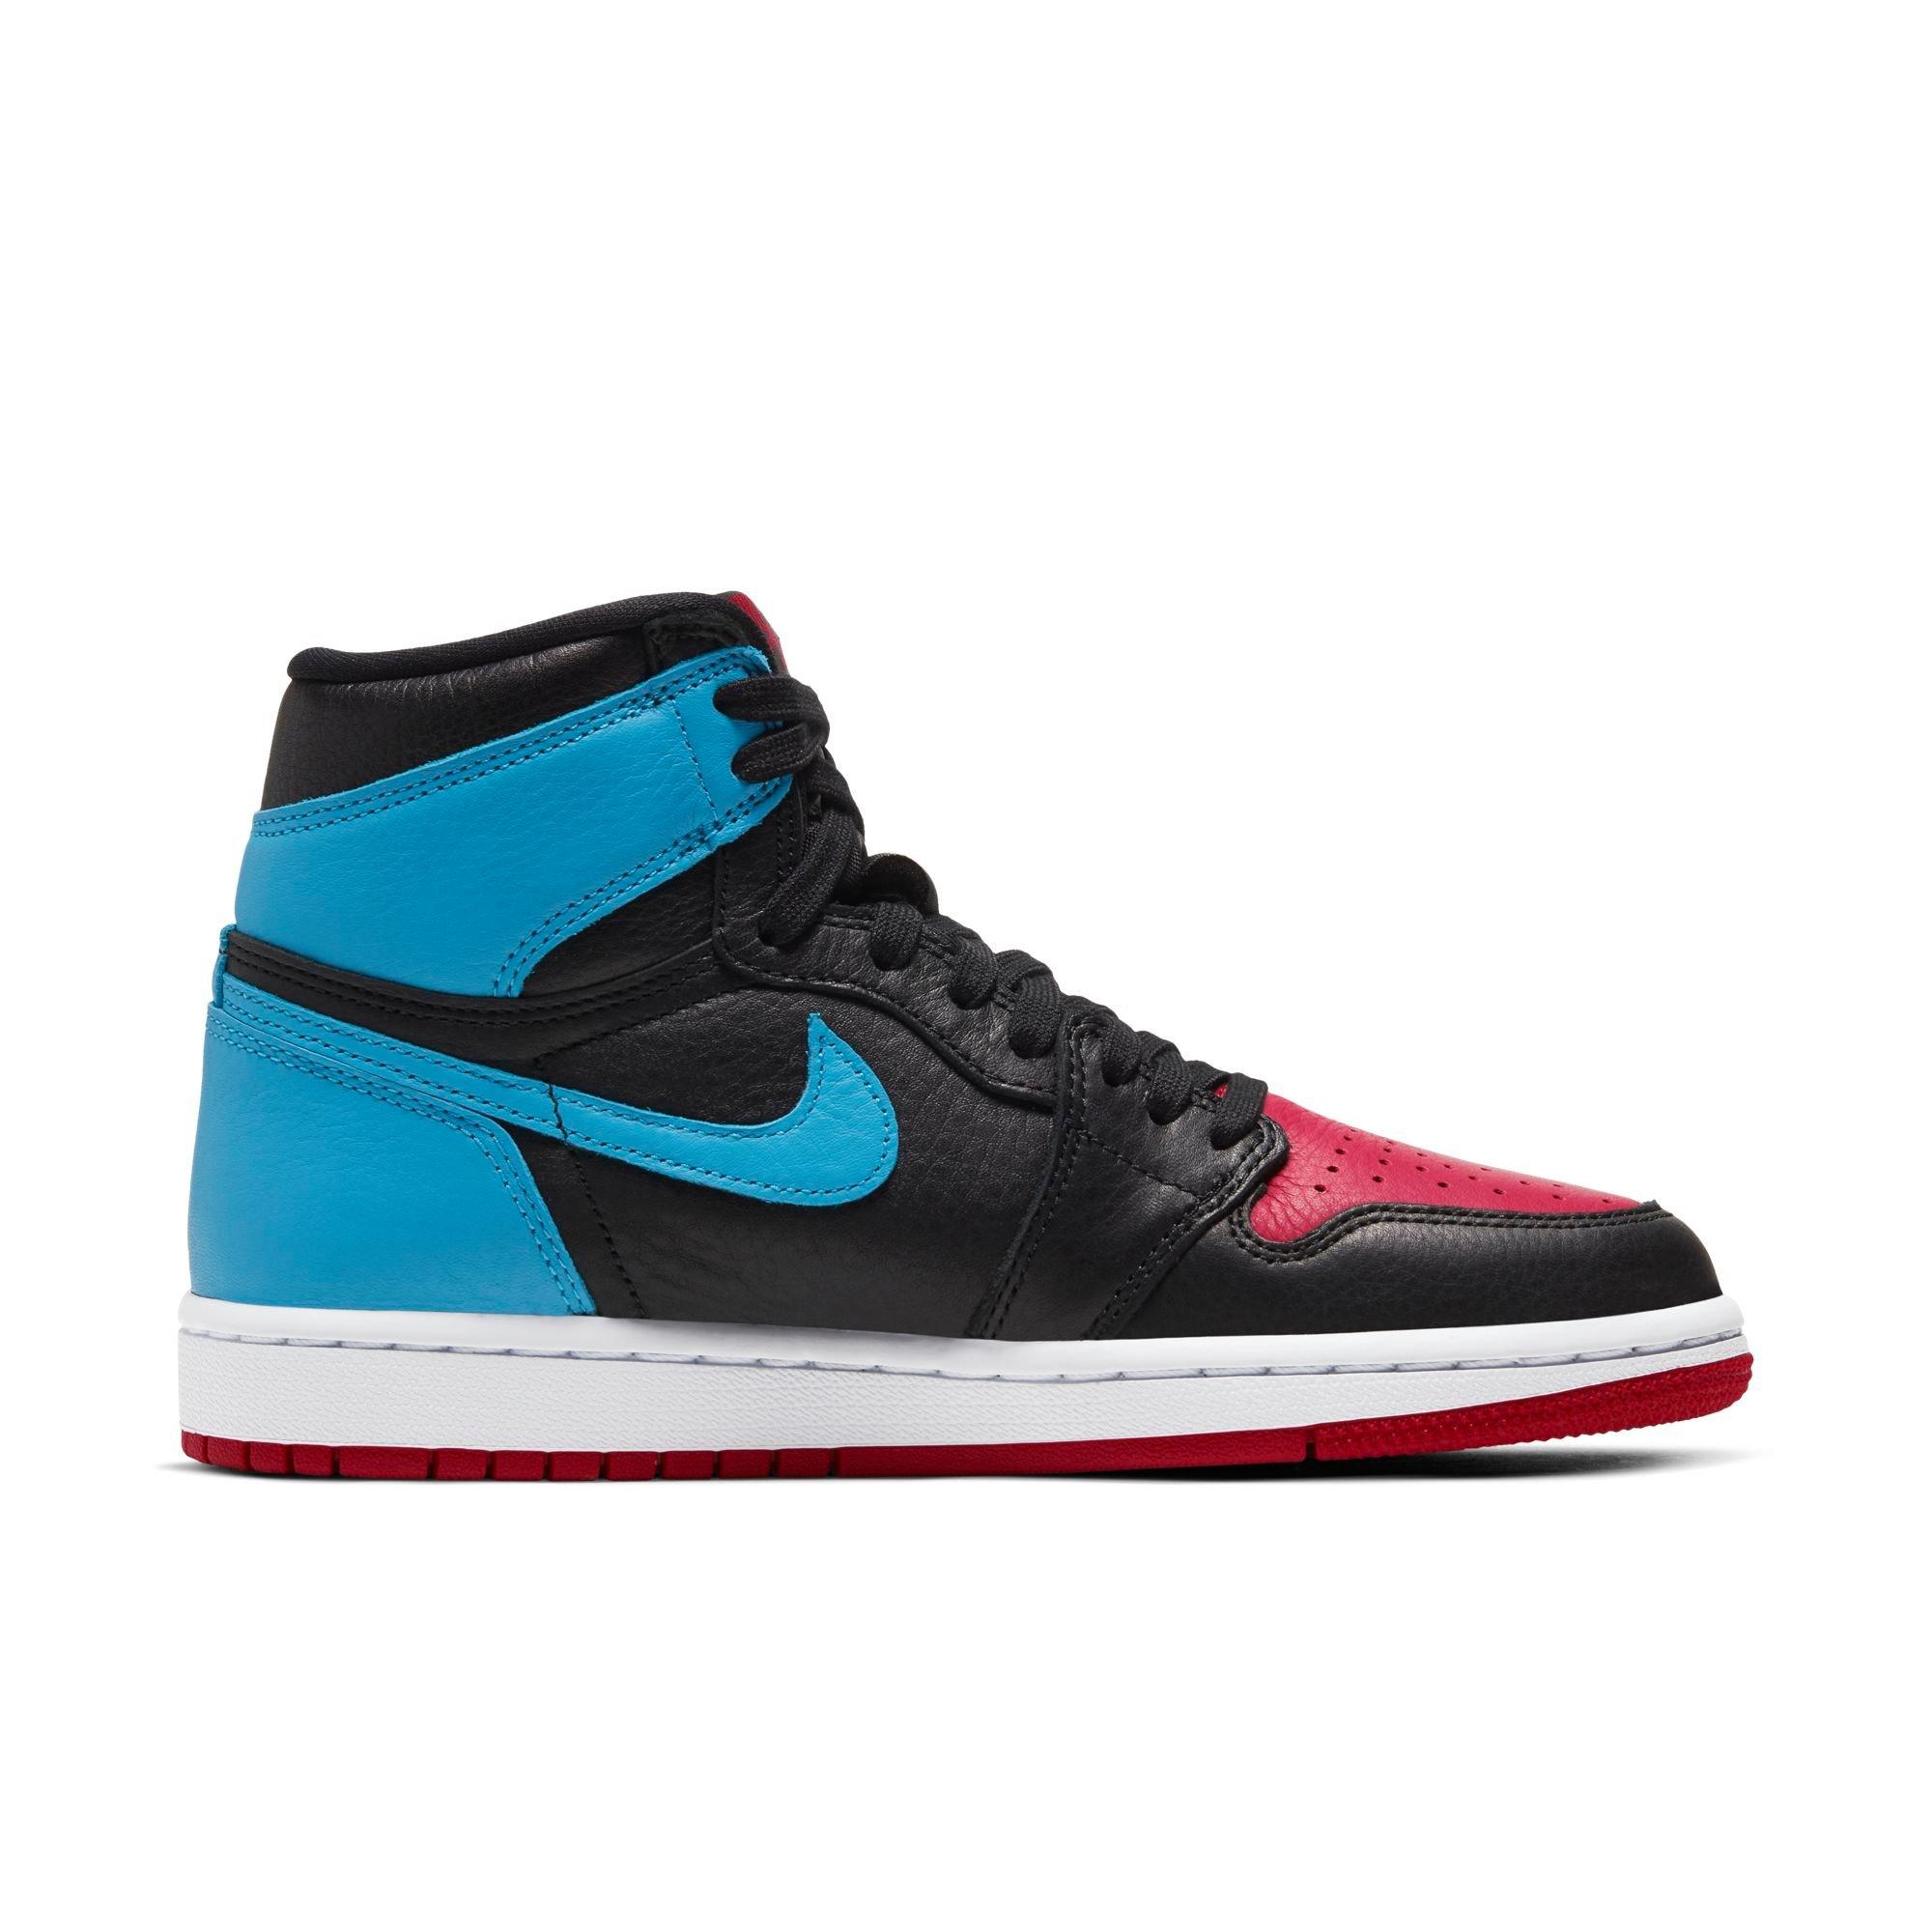 jordan one blue and red